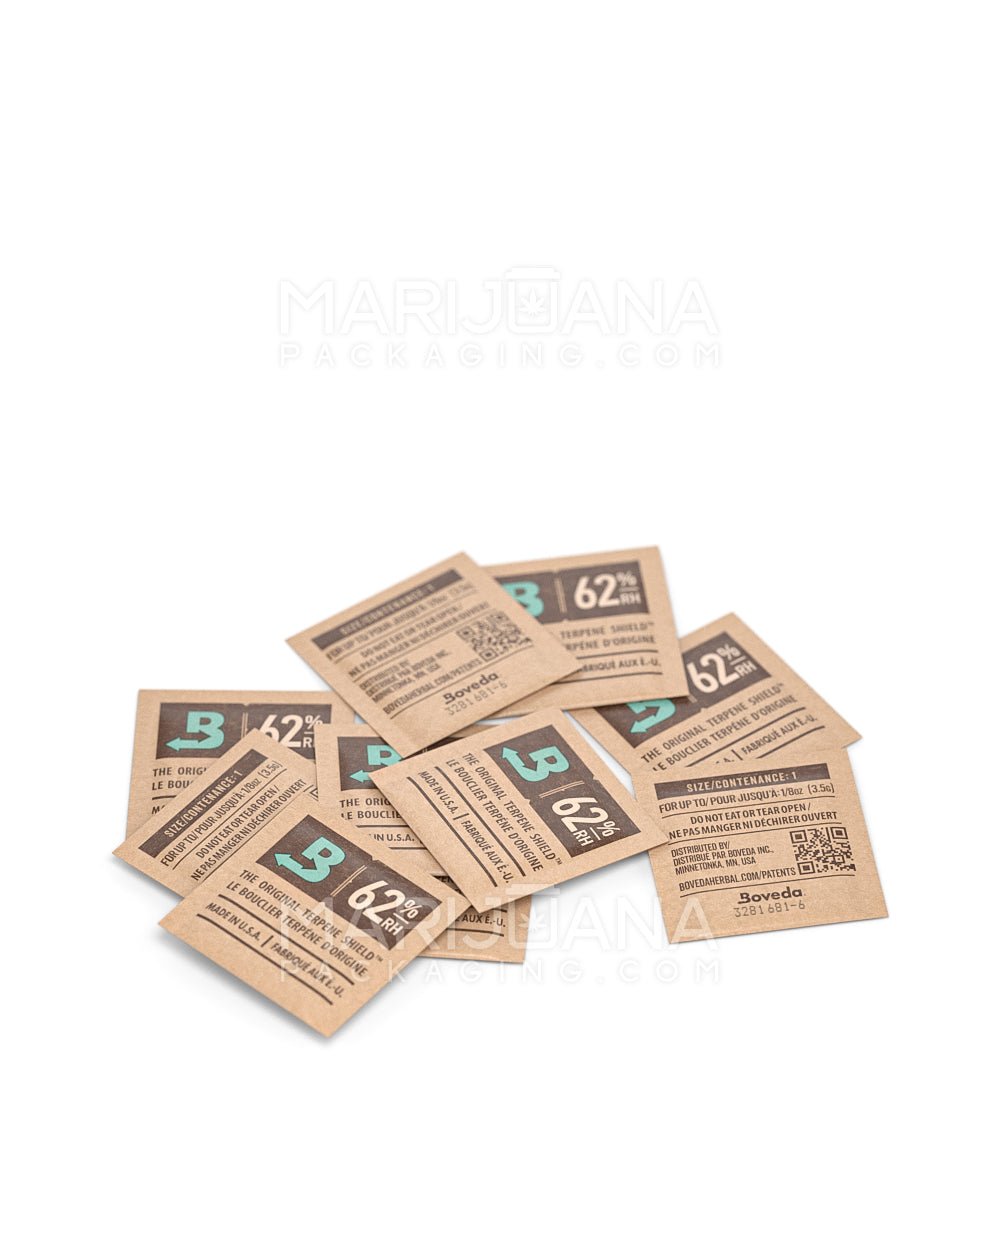 BOVEDA | Humidity Control Packs | 1 Grams - 62% - 1500 Count - 7